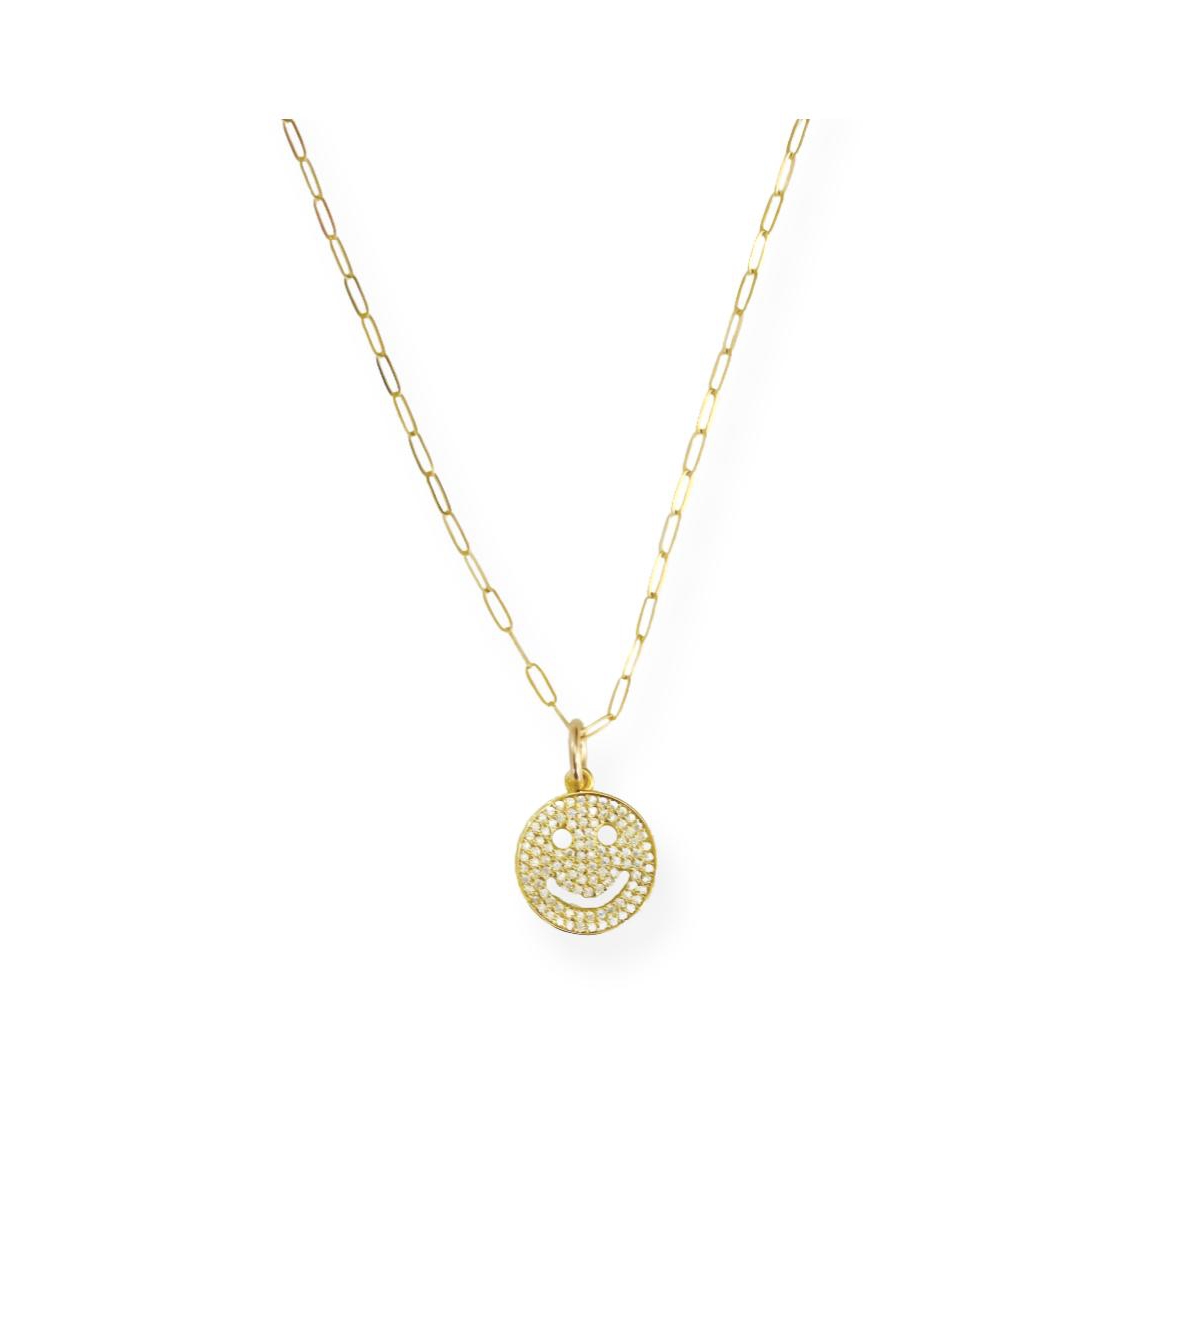 Smiley Face Chain - Gold